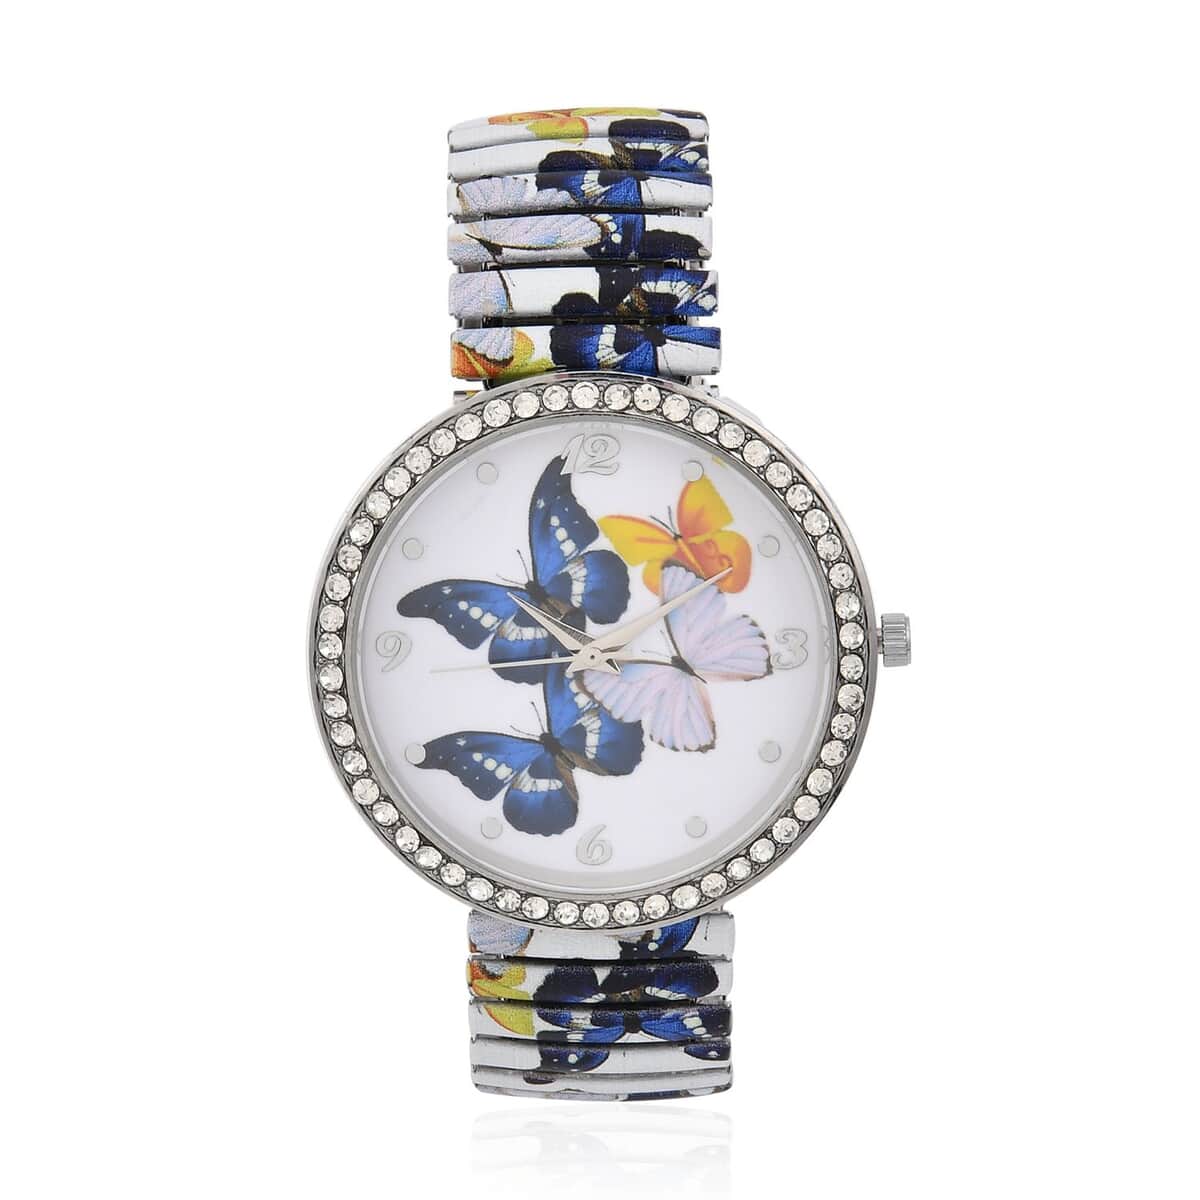 Strada Japanese Movement Bracelet Watch in Stainless Steel, Peacock and Butterfly Stretchable Watch with Austrian Crystals Studded Stretch Band Wrist